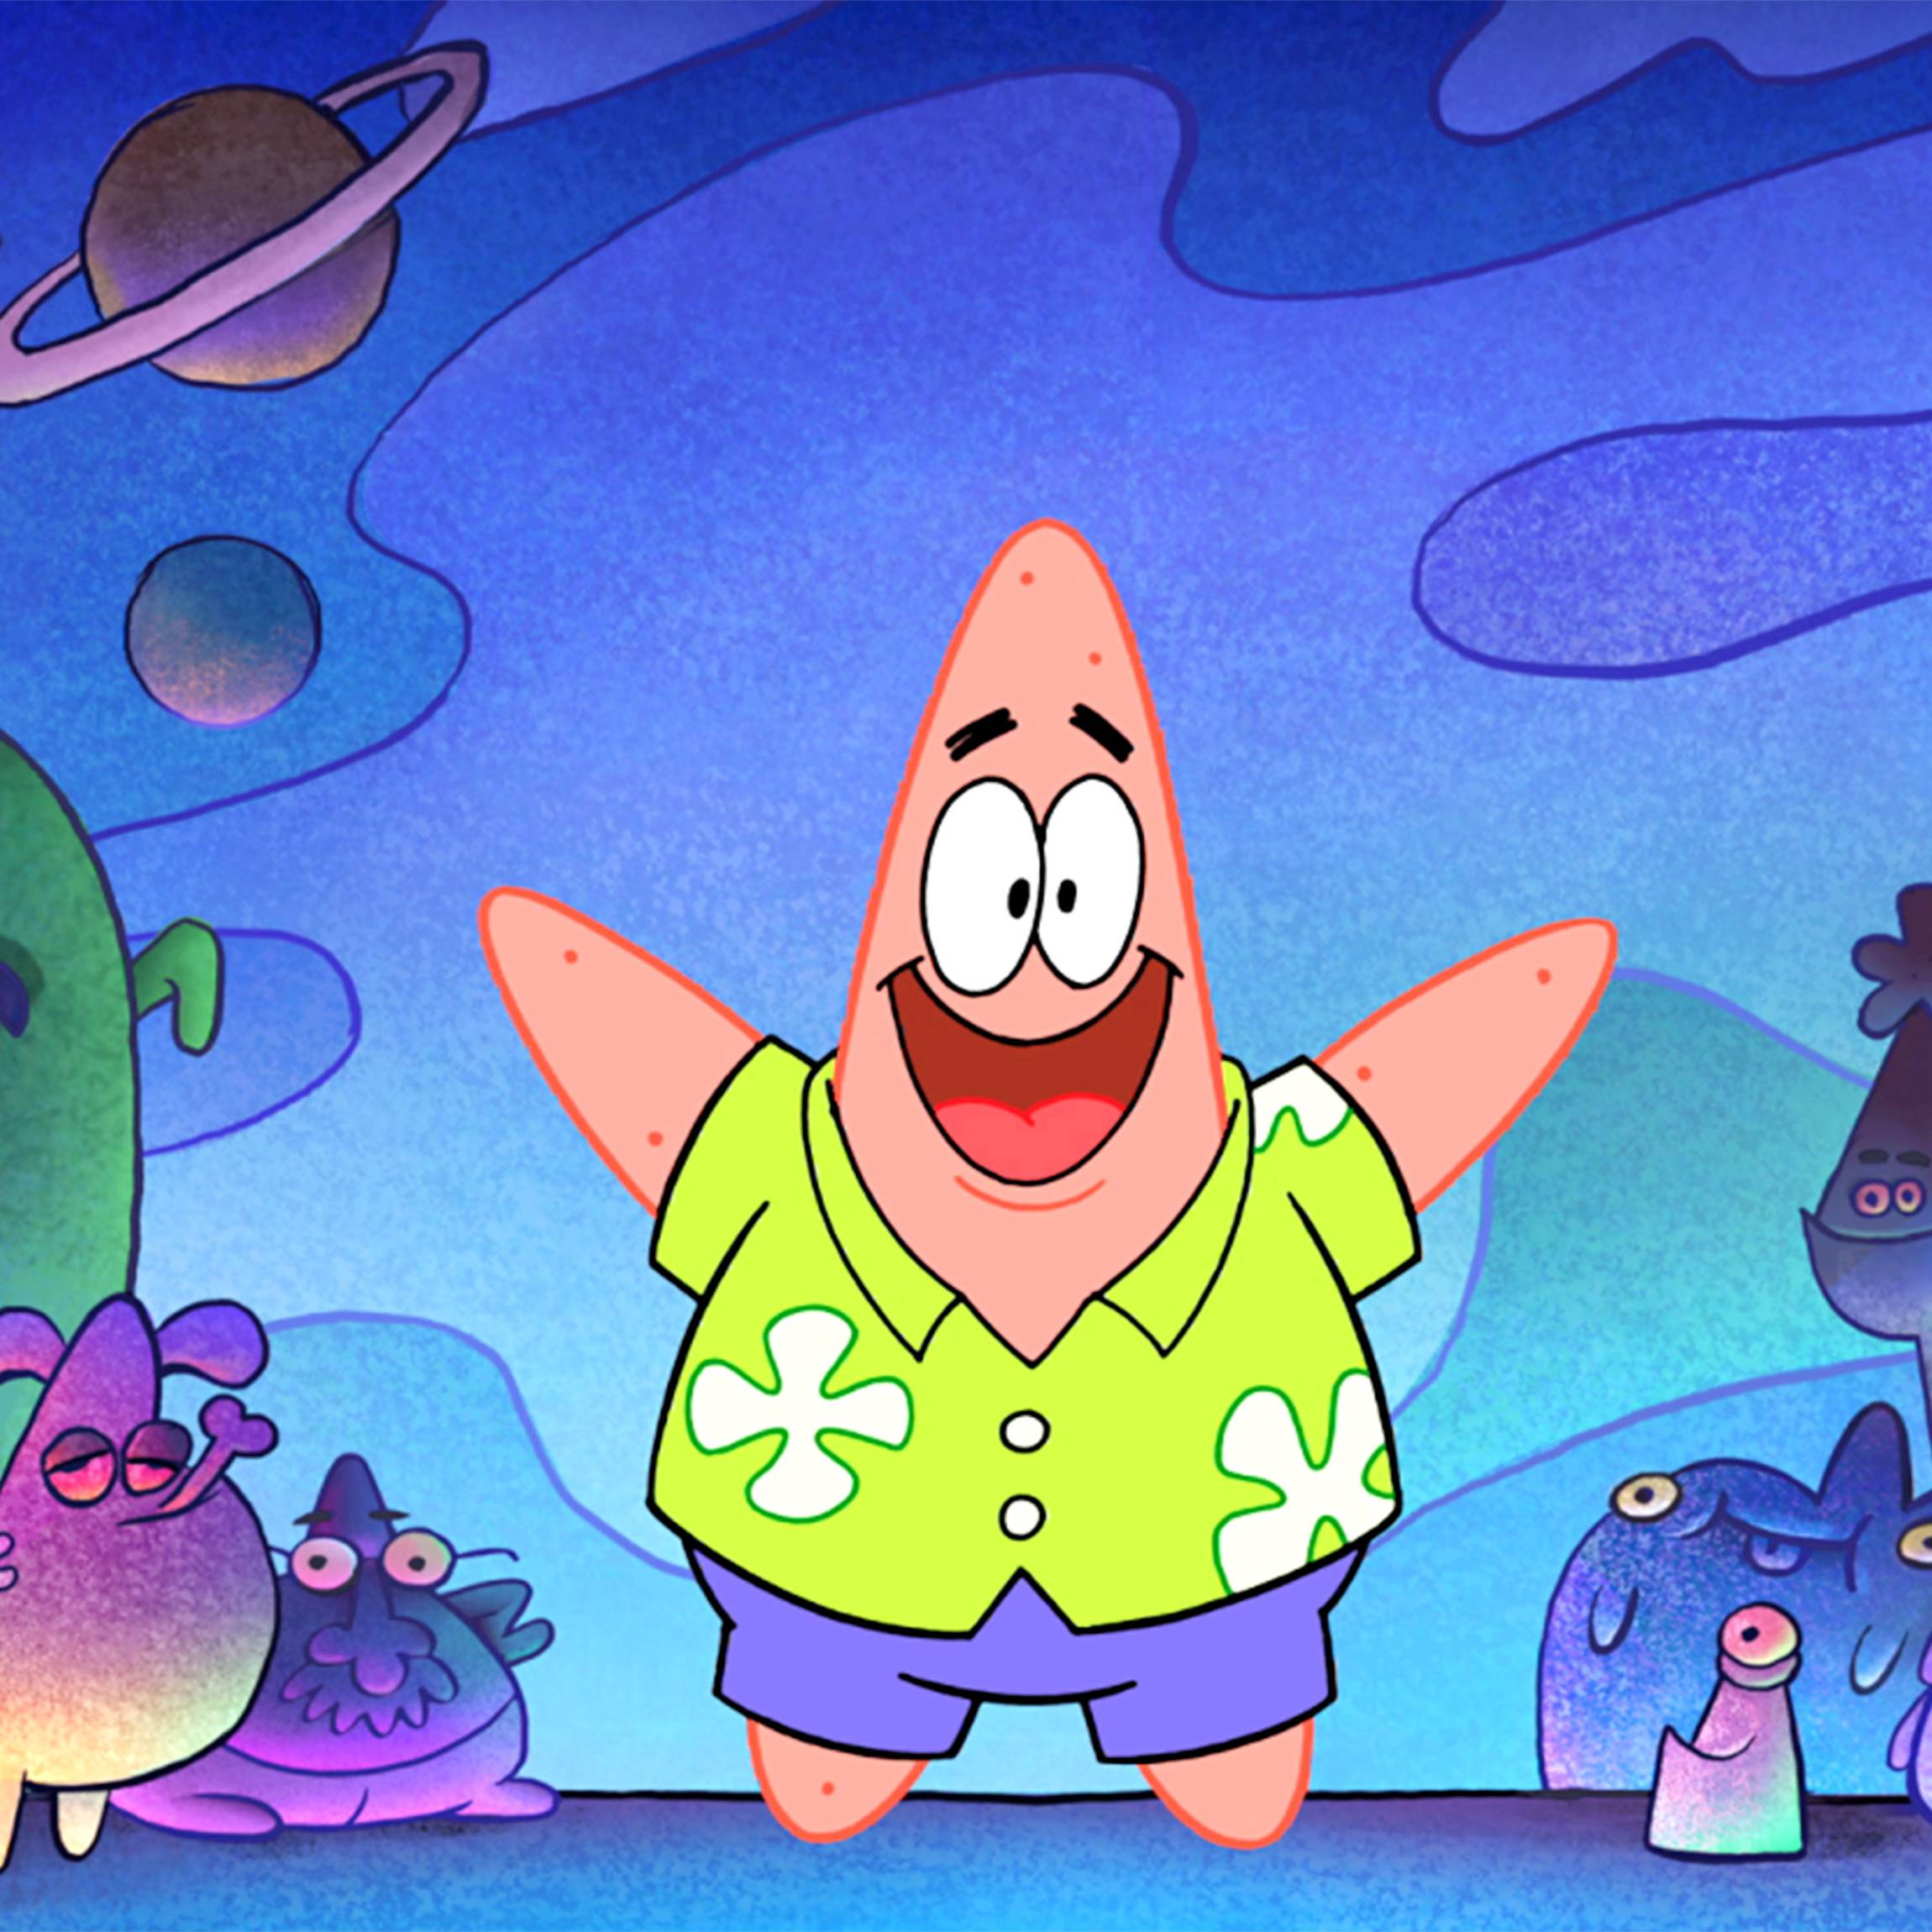 Patrick Star is smiling with a green floral shirt and purple pants.